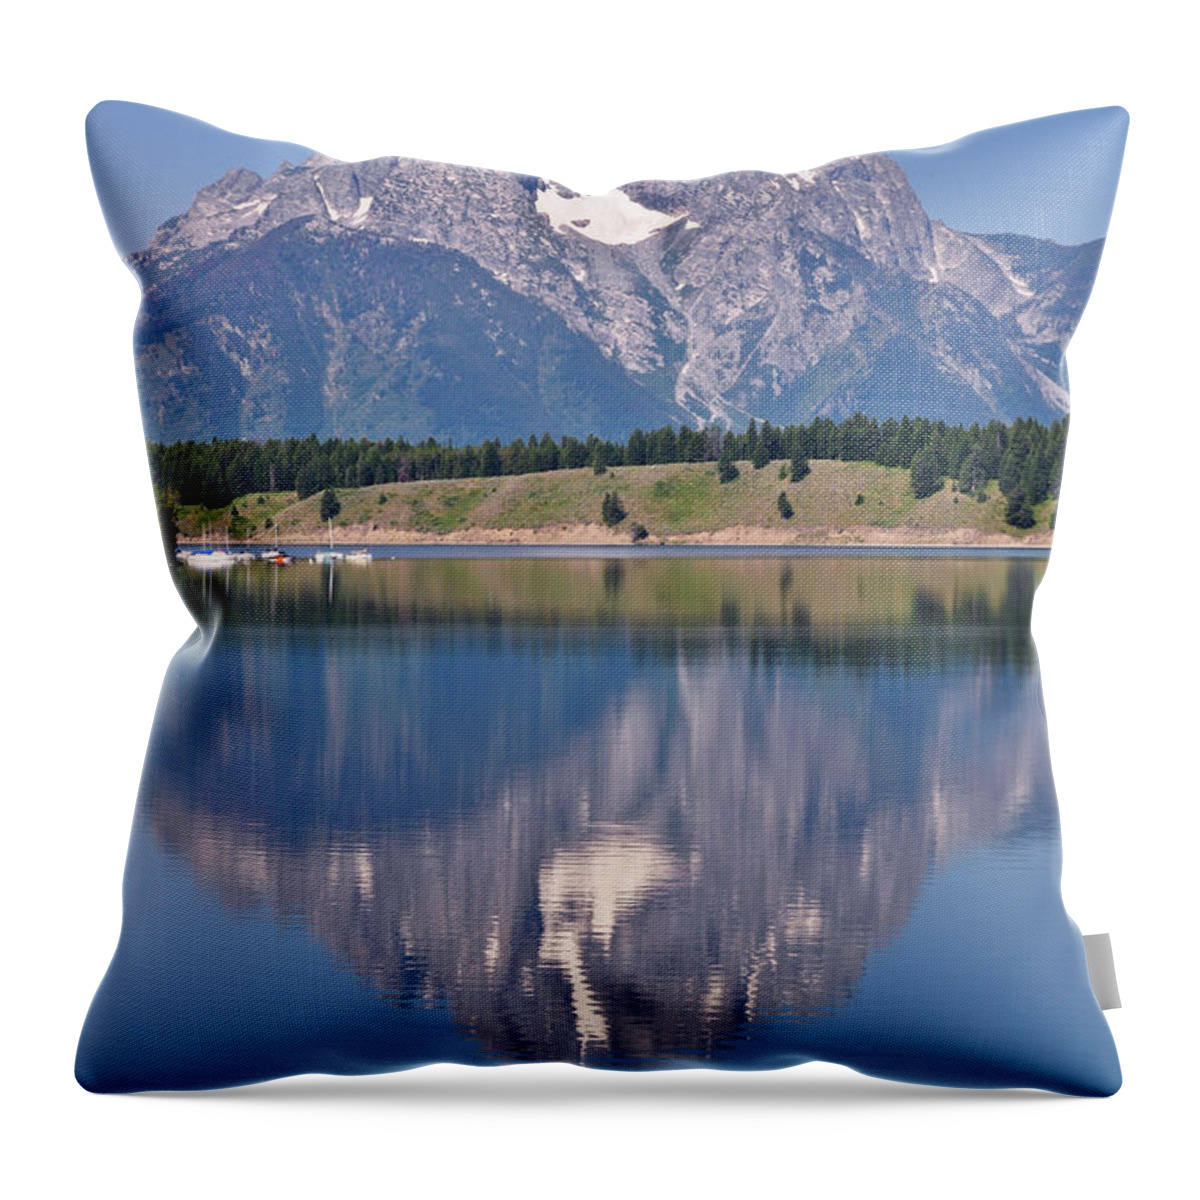 Mt. Moran Throw Pillow featuring the photograph Mt. Moran by Greg Norrell